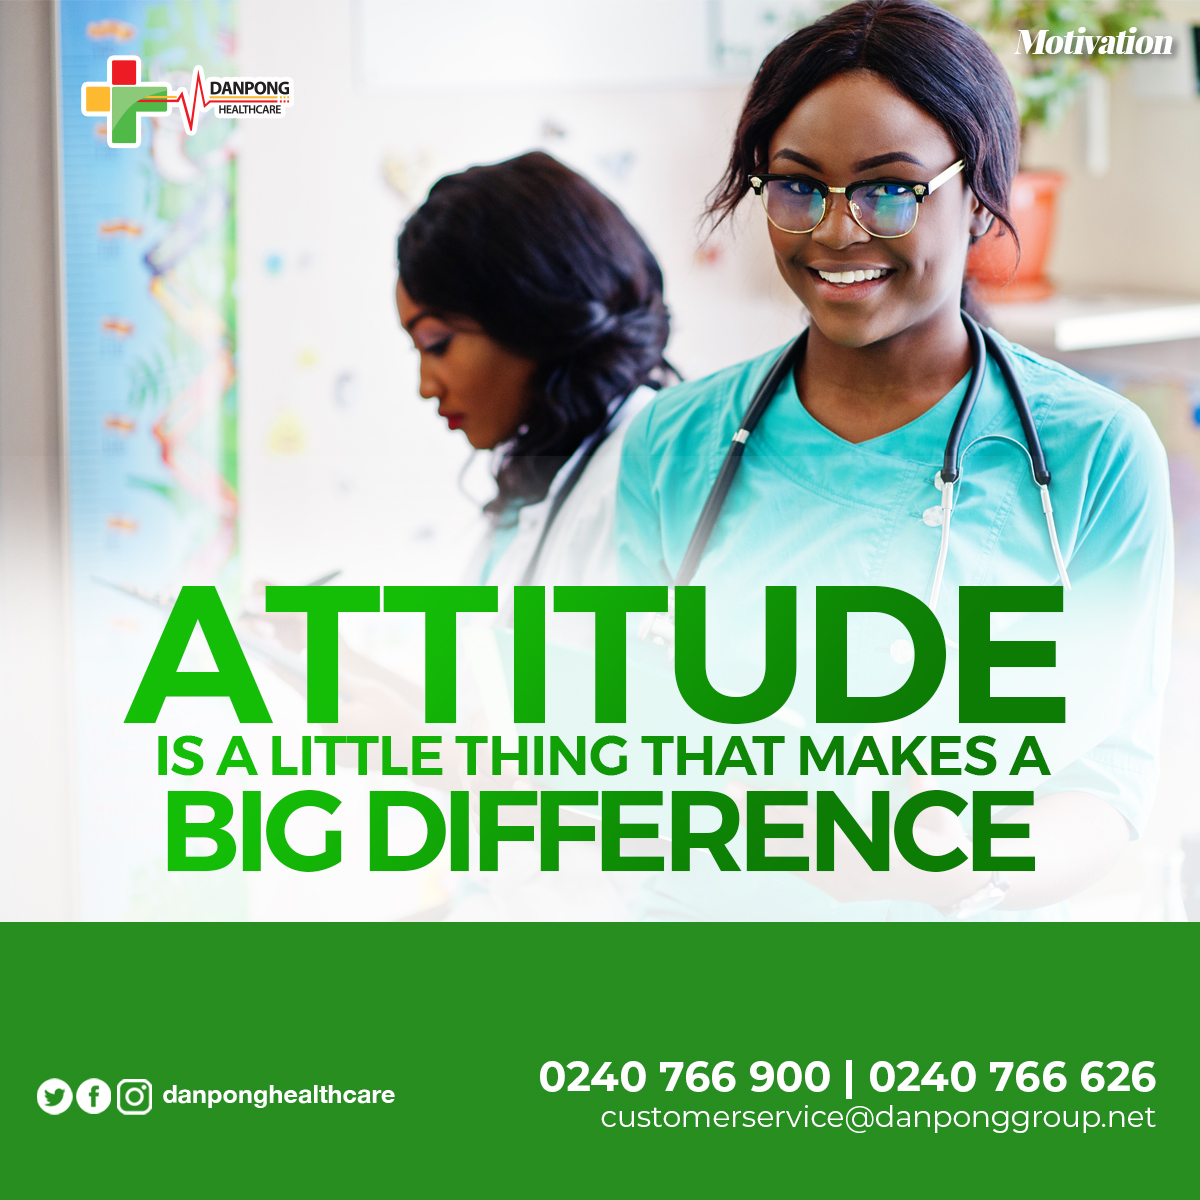 Attitude is a little thing that makes a big Difference
#Danpongcares
#healthyandhappy